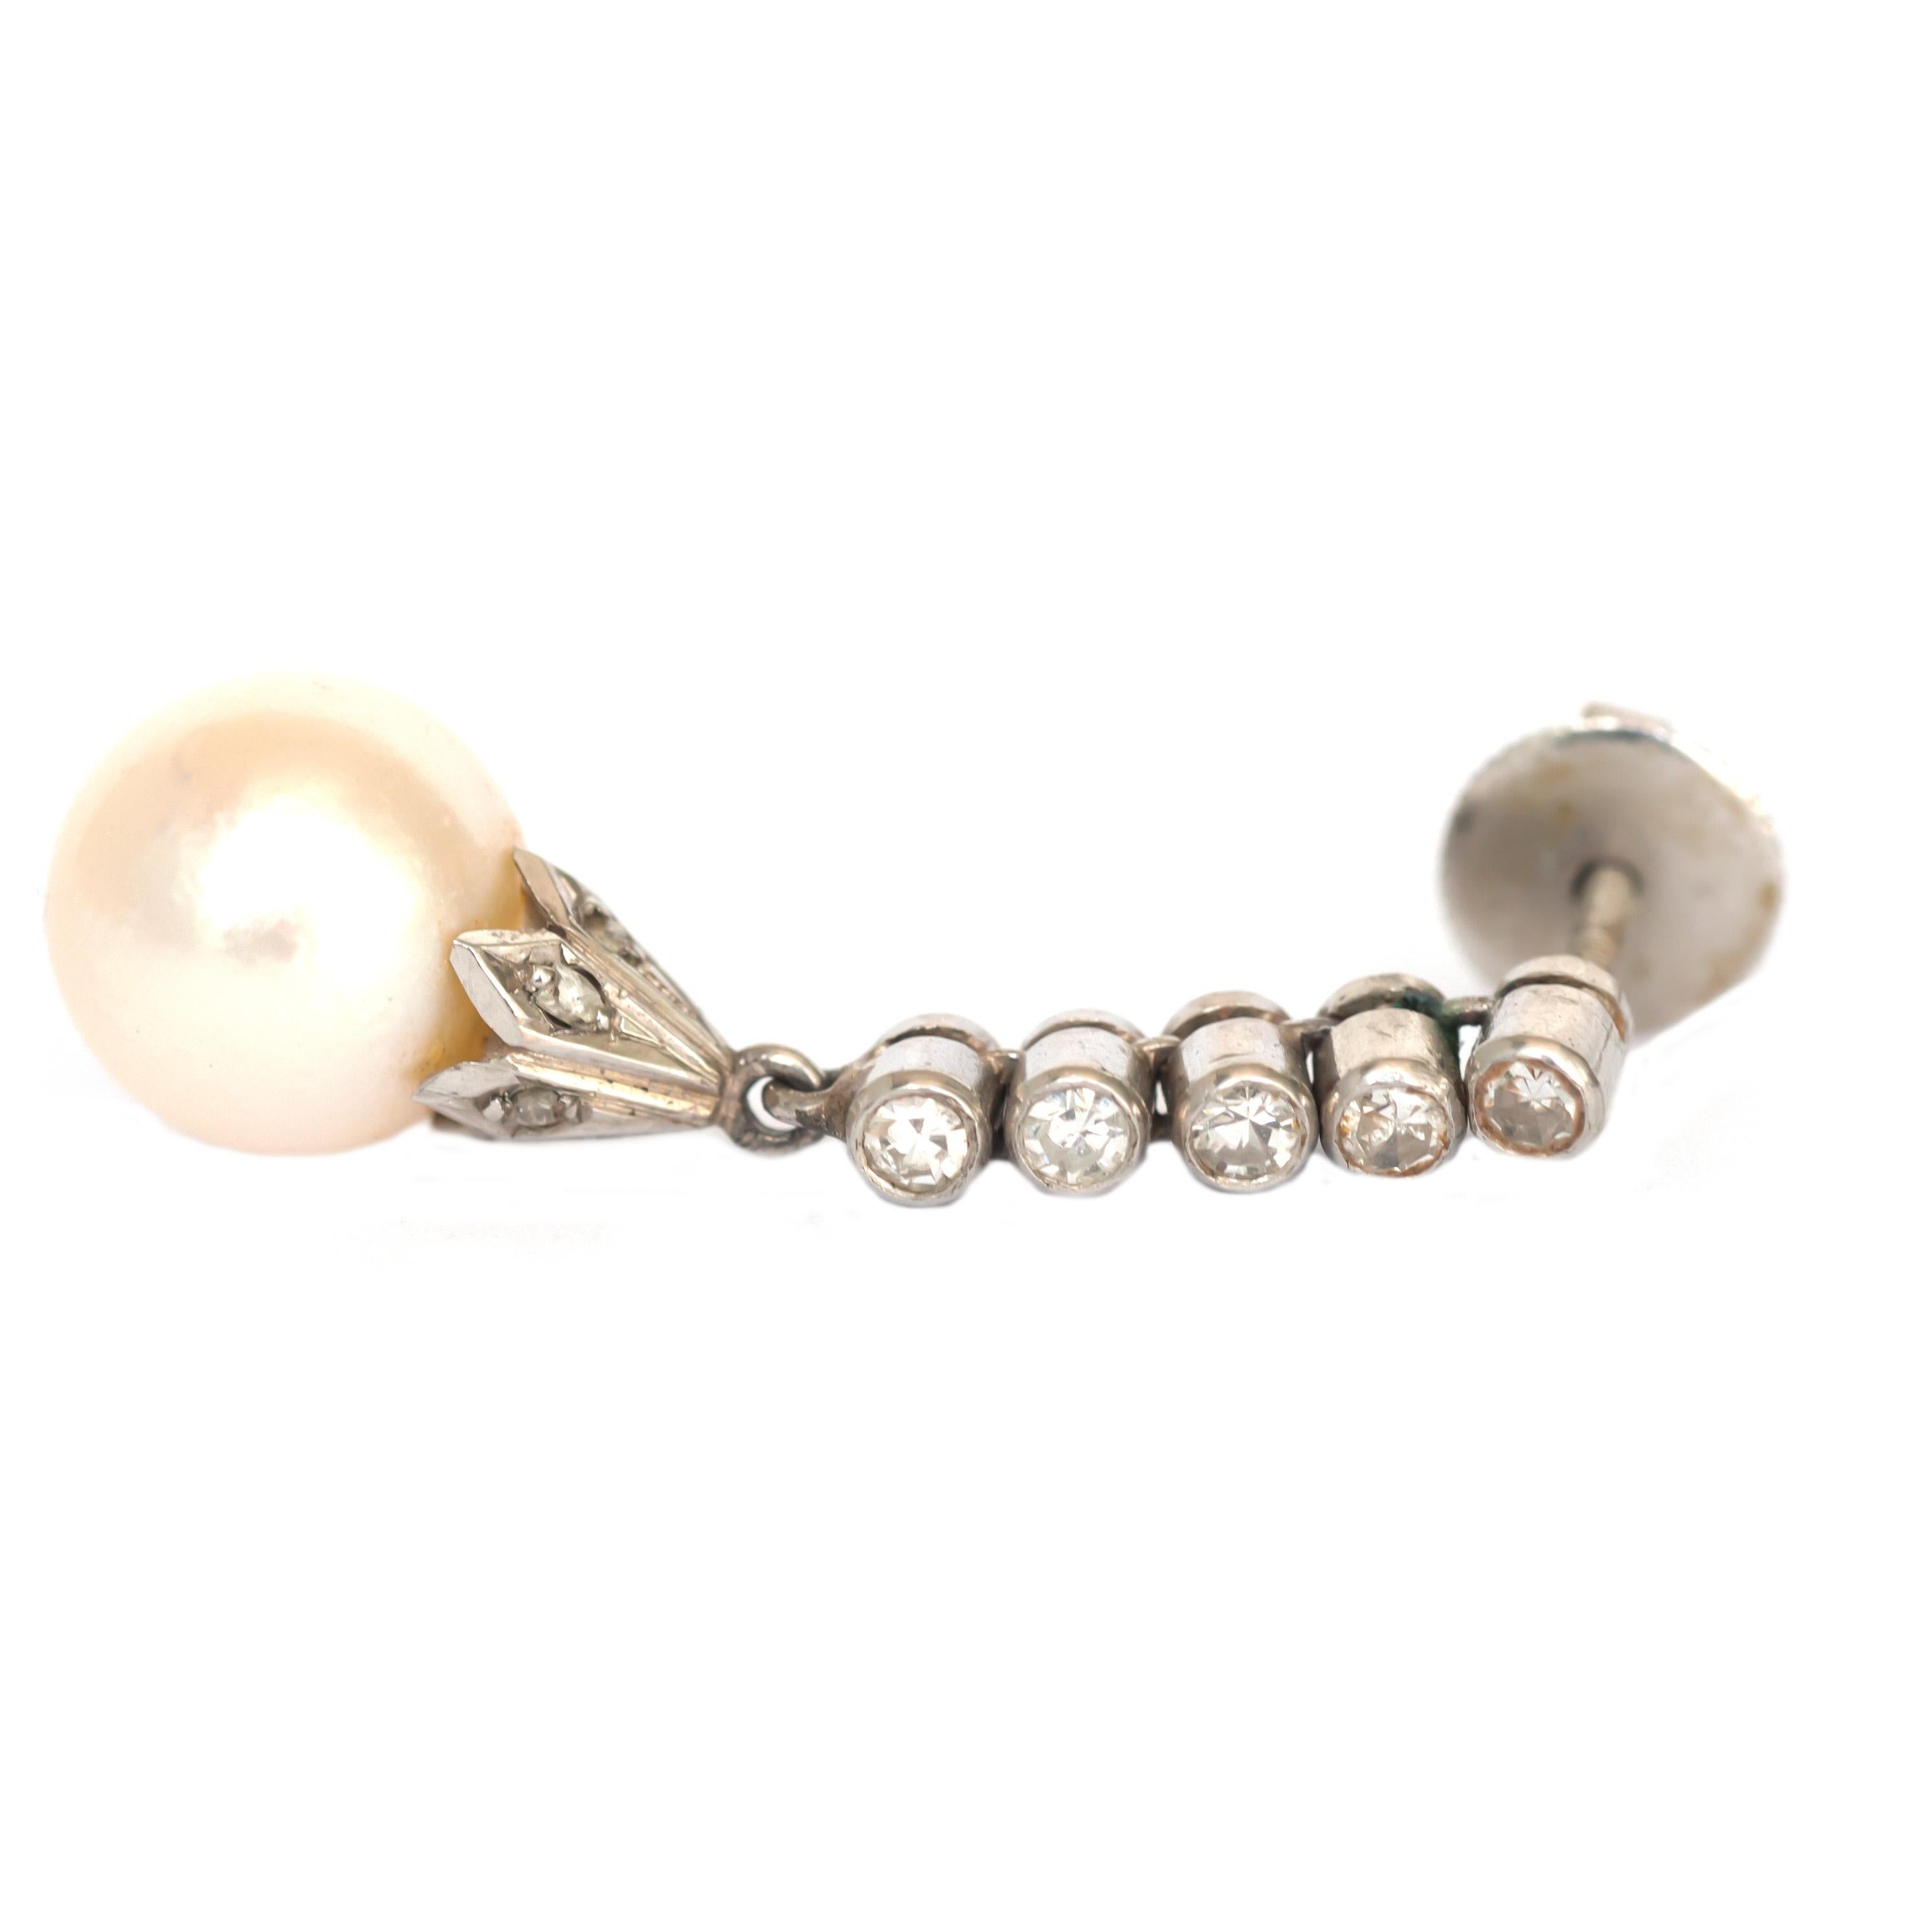 Length: 1 inch
Metal Type: Platinum
Weight: 6.6 grams

Center Diamond Details
Type: Natural Pearl
Width: 9.5mm

Side Stone Details: 
Shape: Antique Single Cut 
Total Carat Weight: .20cttw
Color: F
Clarity: VS

Finger to Top of Stone Measurement: